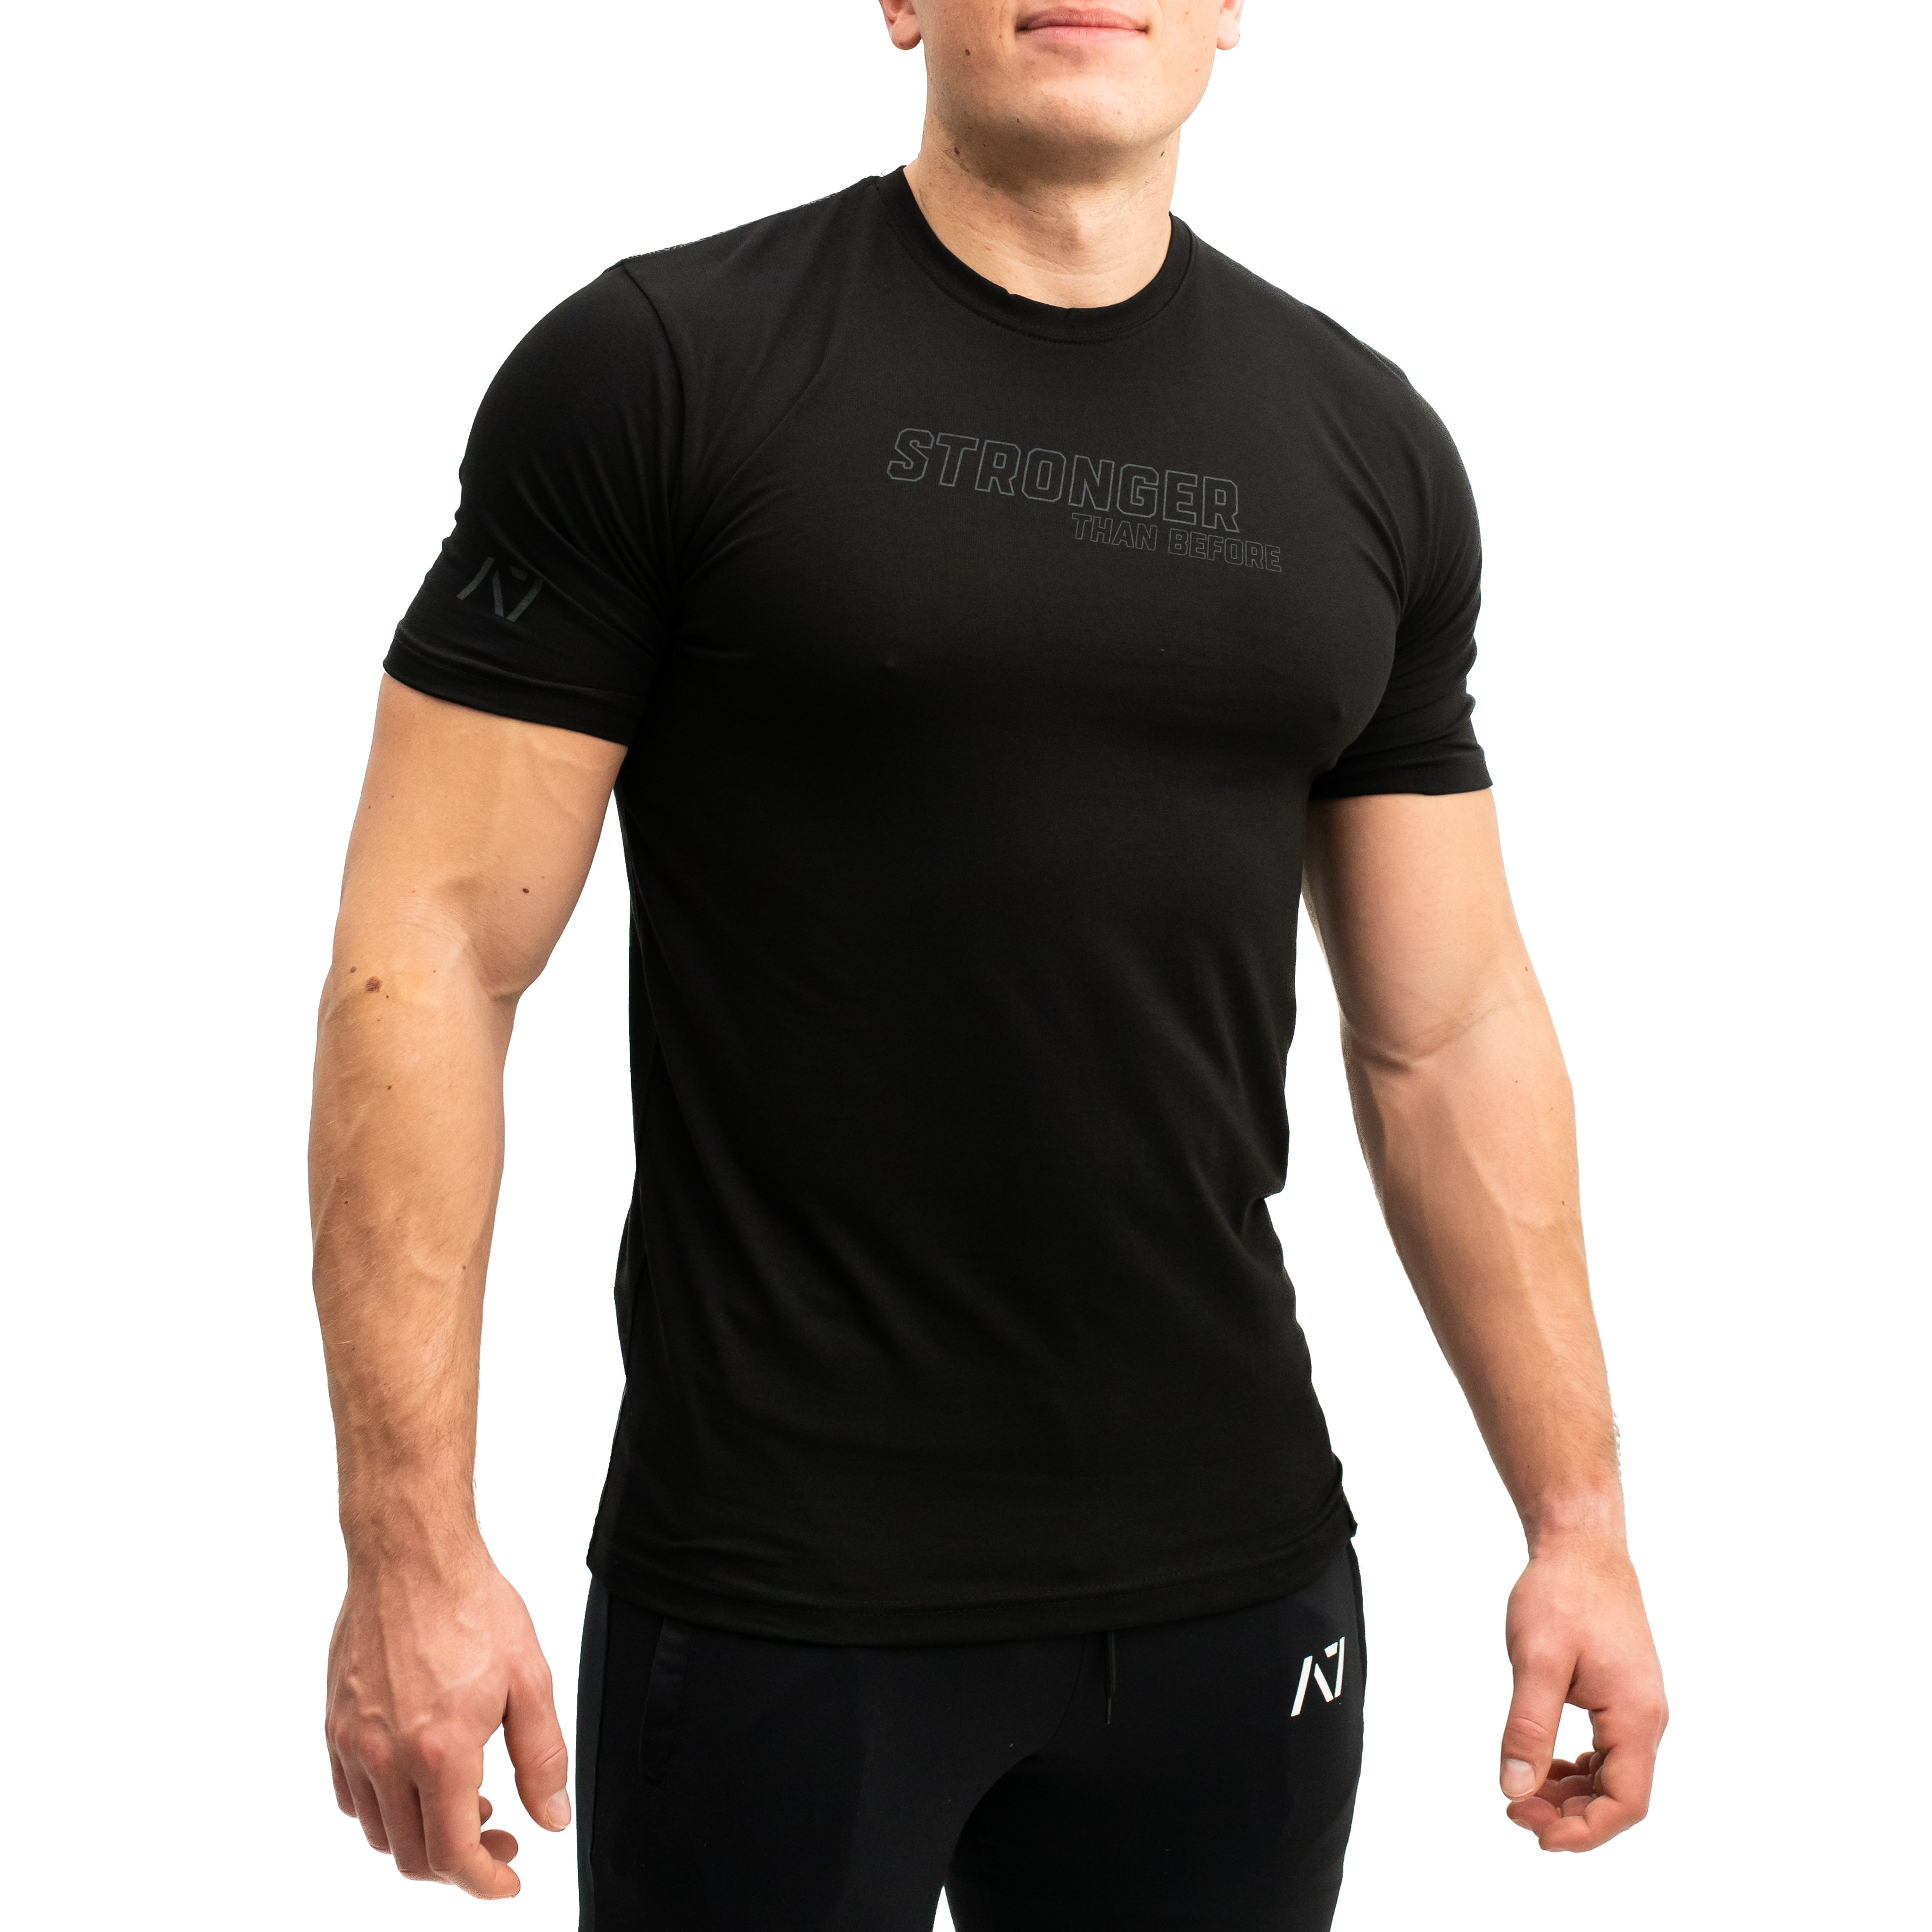 The Conquer Bar Grip Shirt reminds us we can conquer challenges and make an impact. The future is only the continuation of our progress. Purchase Conquer Bar Grip from A7 UK and A7 Europe. The silicone grip helps with slippery commercial benches and bars and anchors the barbell to your back. A7UK has the best Powerlifting apparel for all workouts. Available in UK and Europe including France, Italy, Germany, the Netherlands, Sweden and Poland.